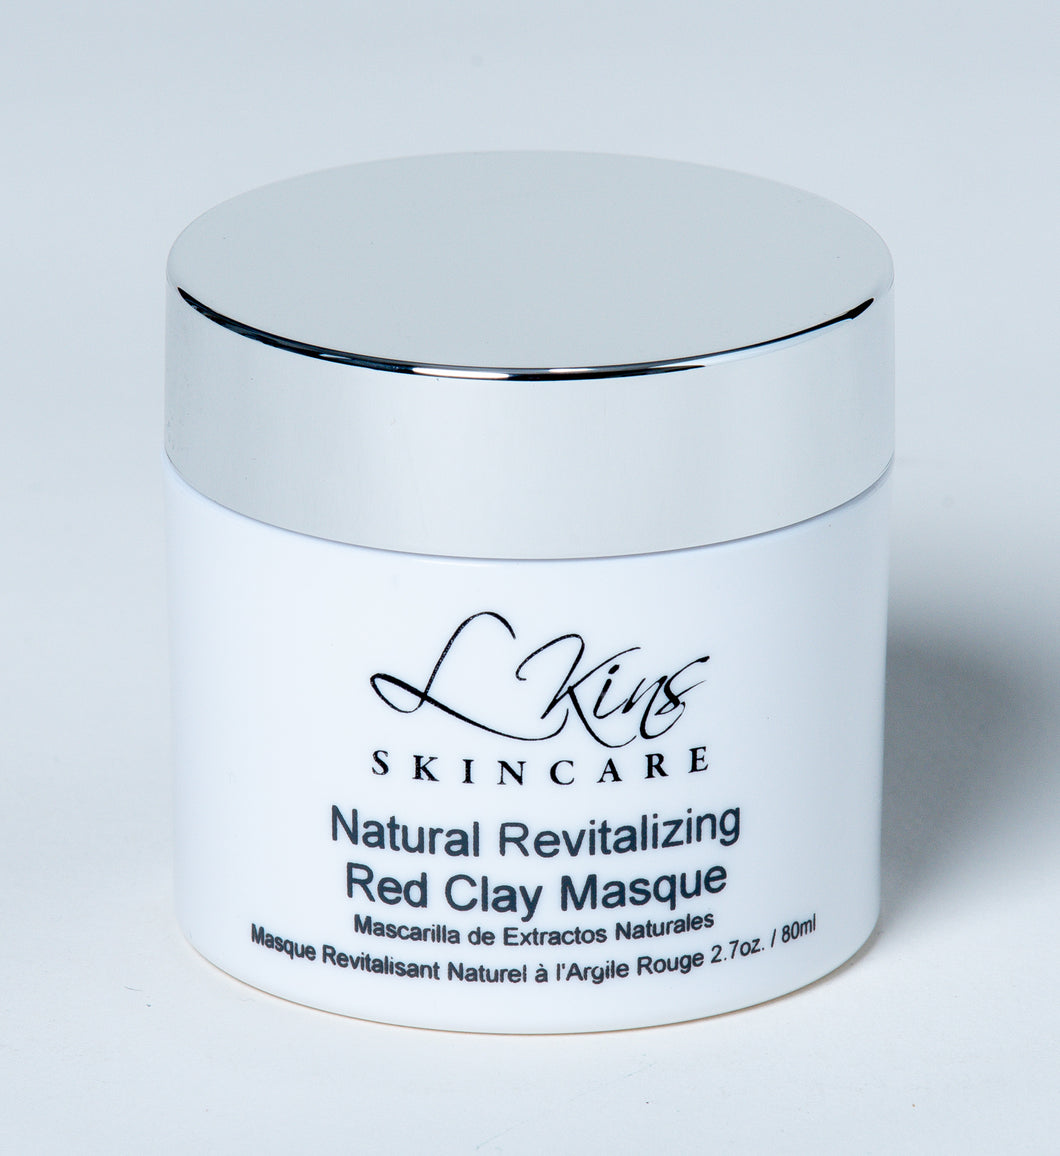 Natural Revitalizing Red Clay Masque